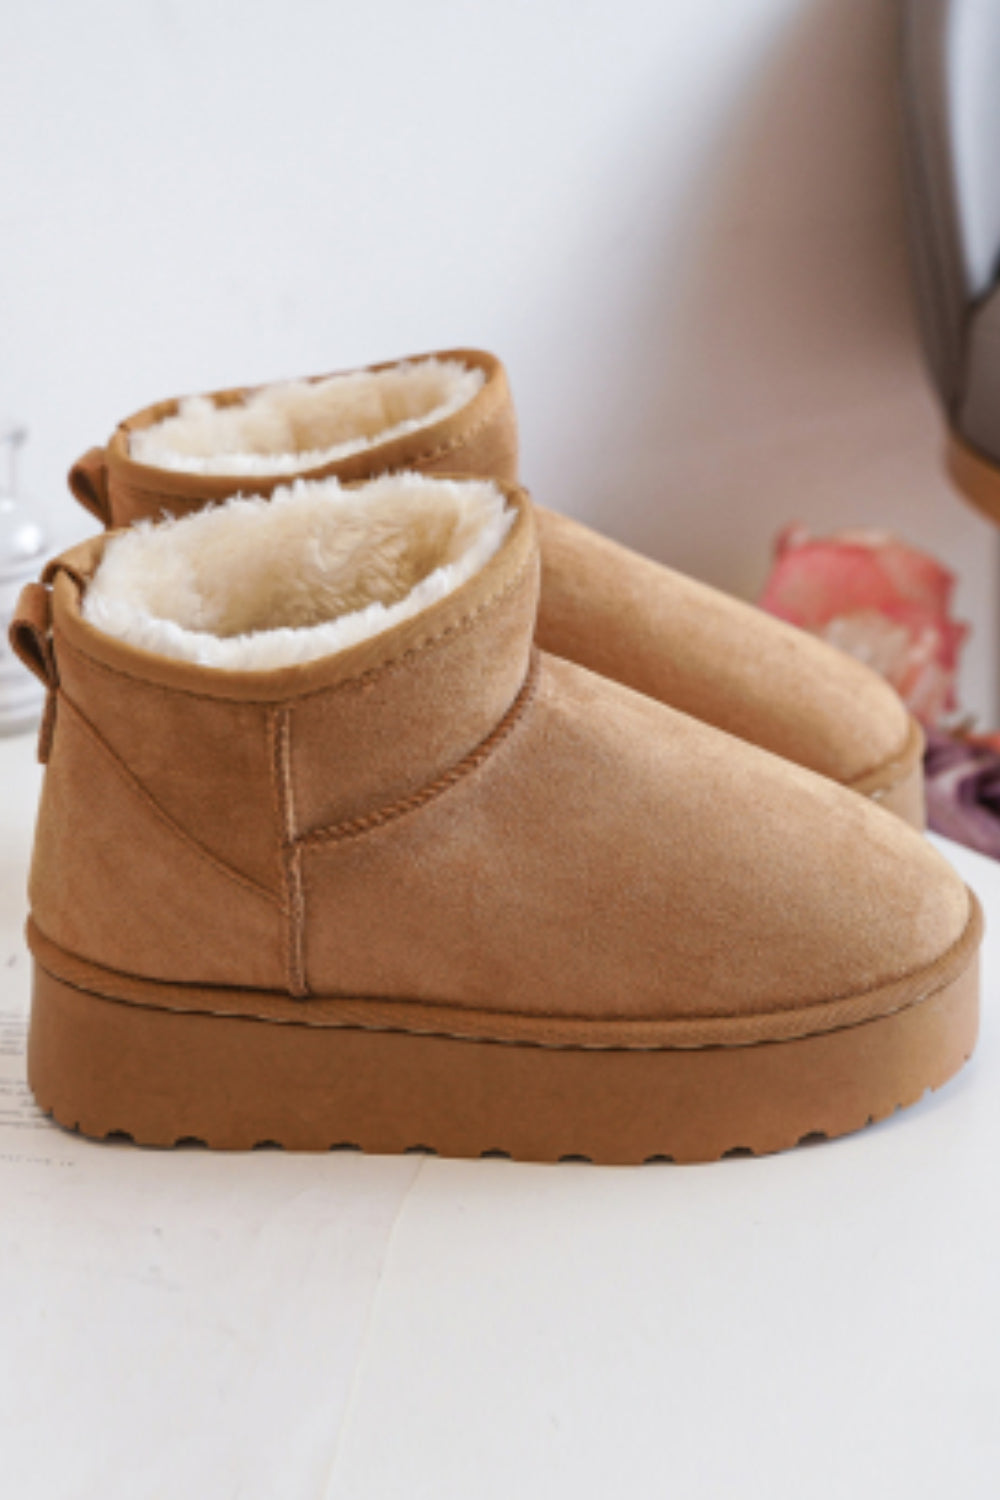 KIDS ANKLE LENGTH FAUX FUR LINING BOOTS IN CAMEL 25-30